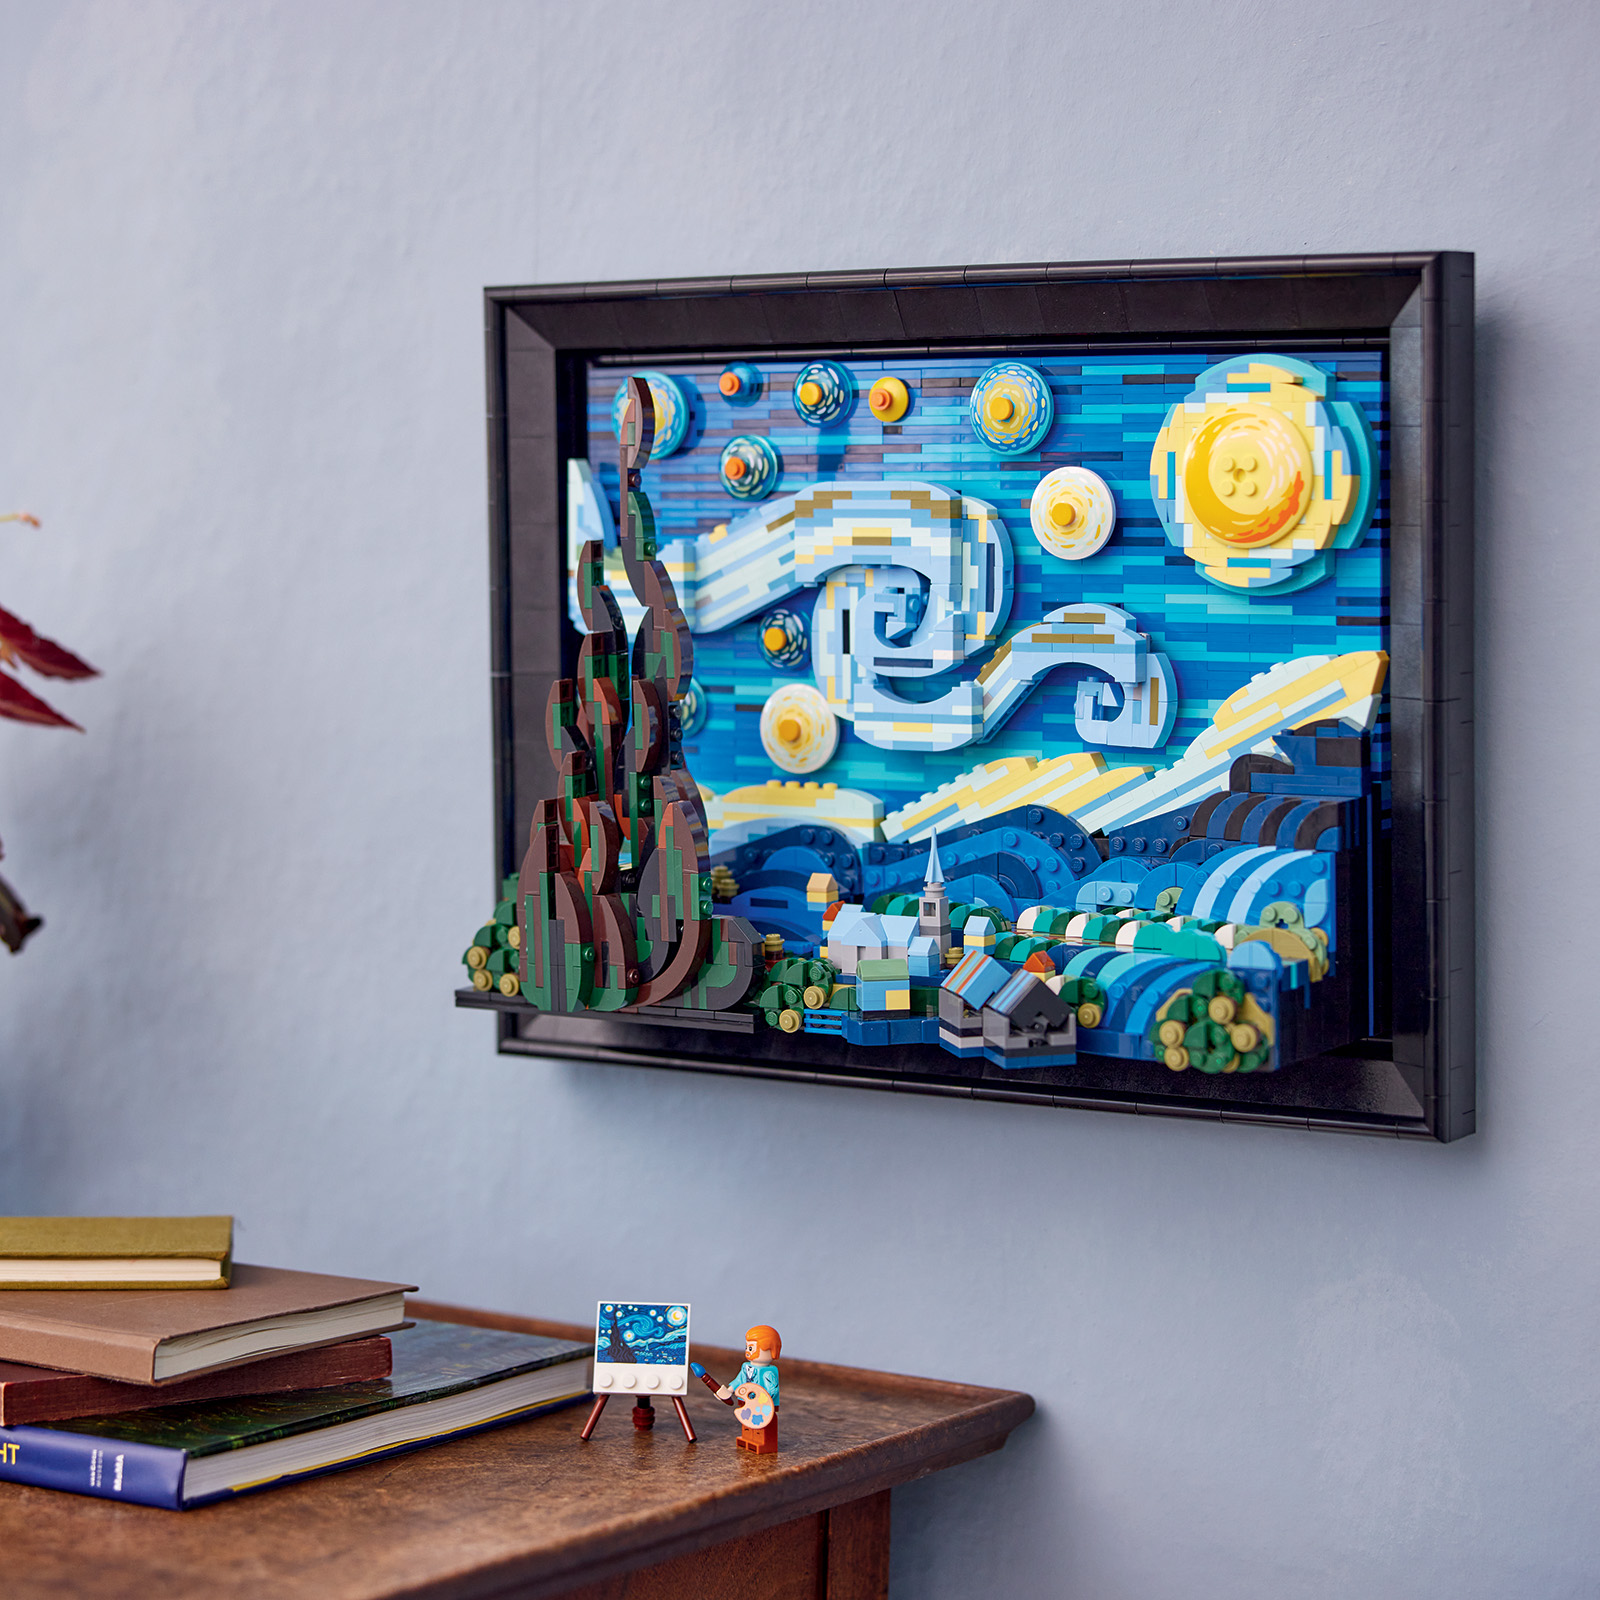 LEGO Ideas 21333 The Starry Night: What you need to know